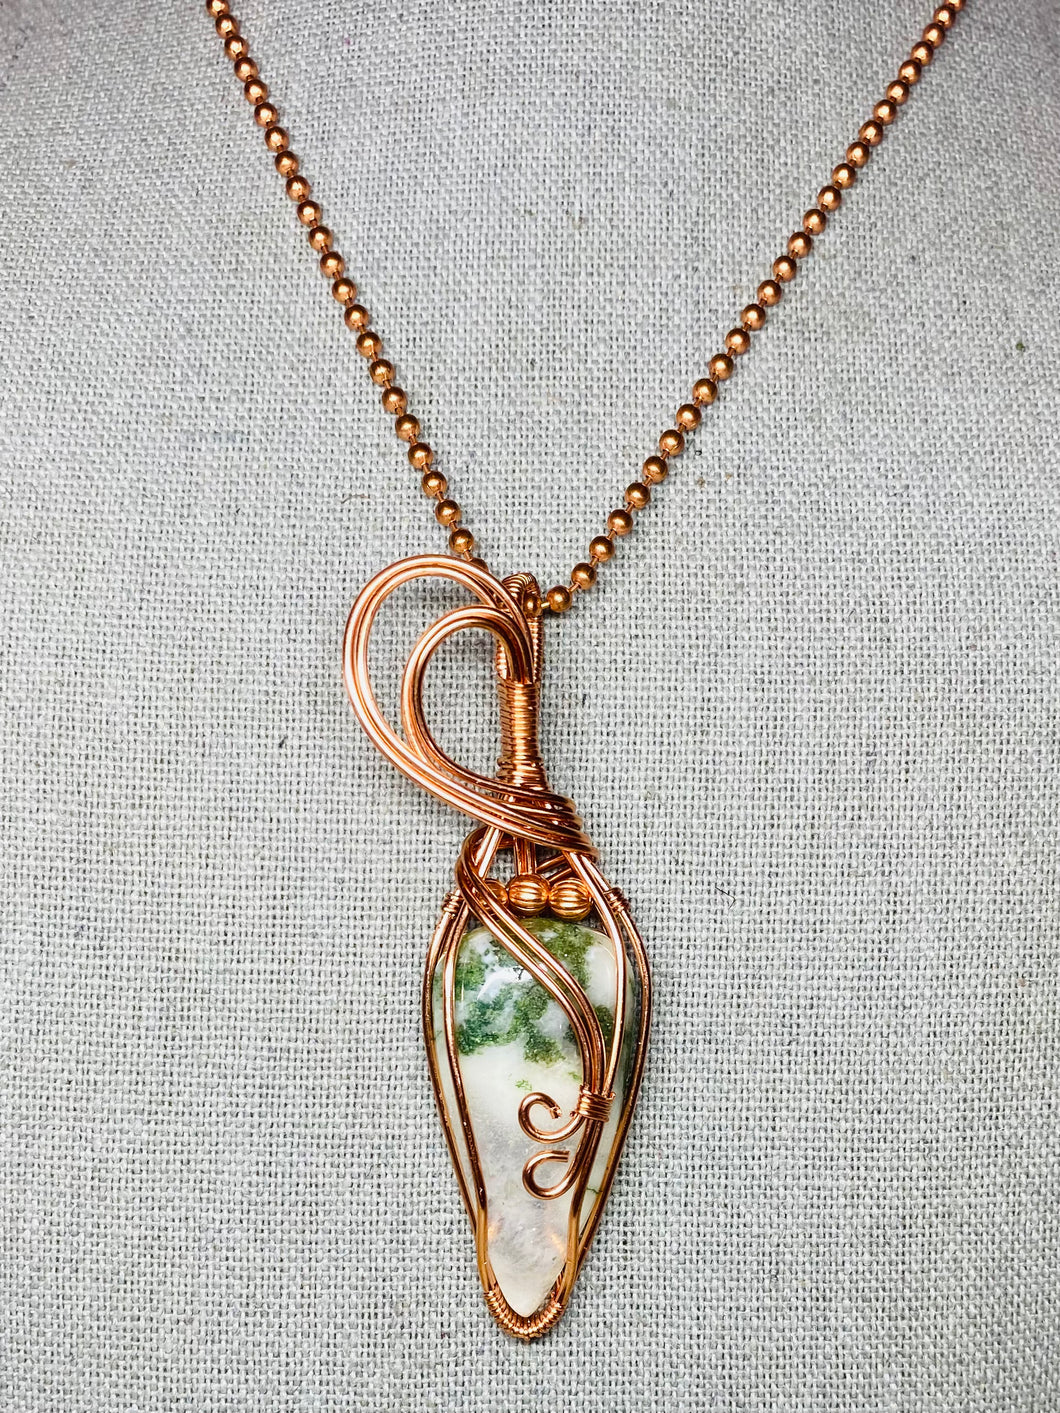 Tree Moss Agate Necklace